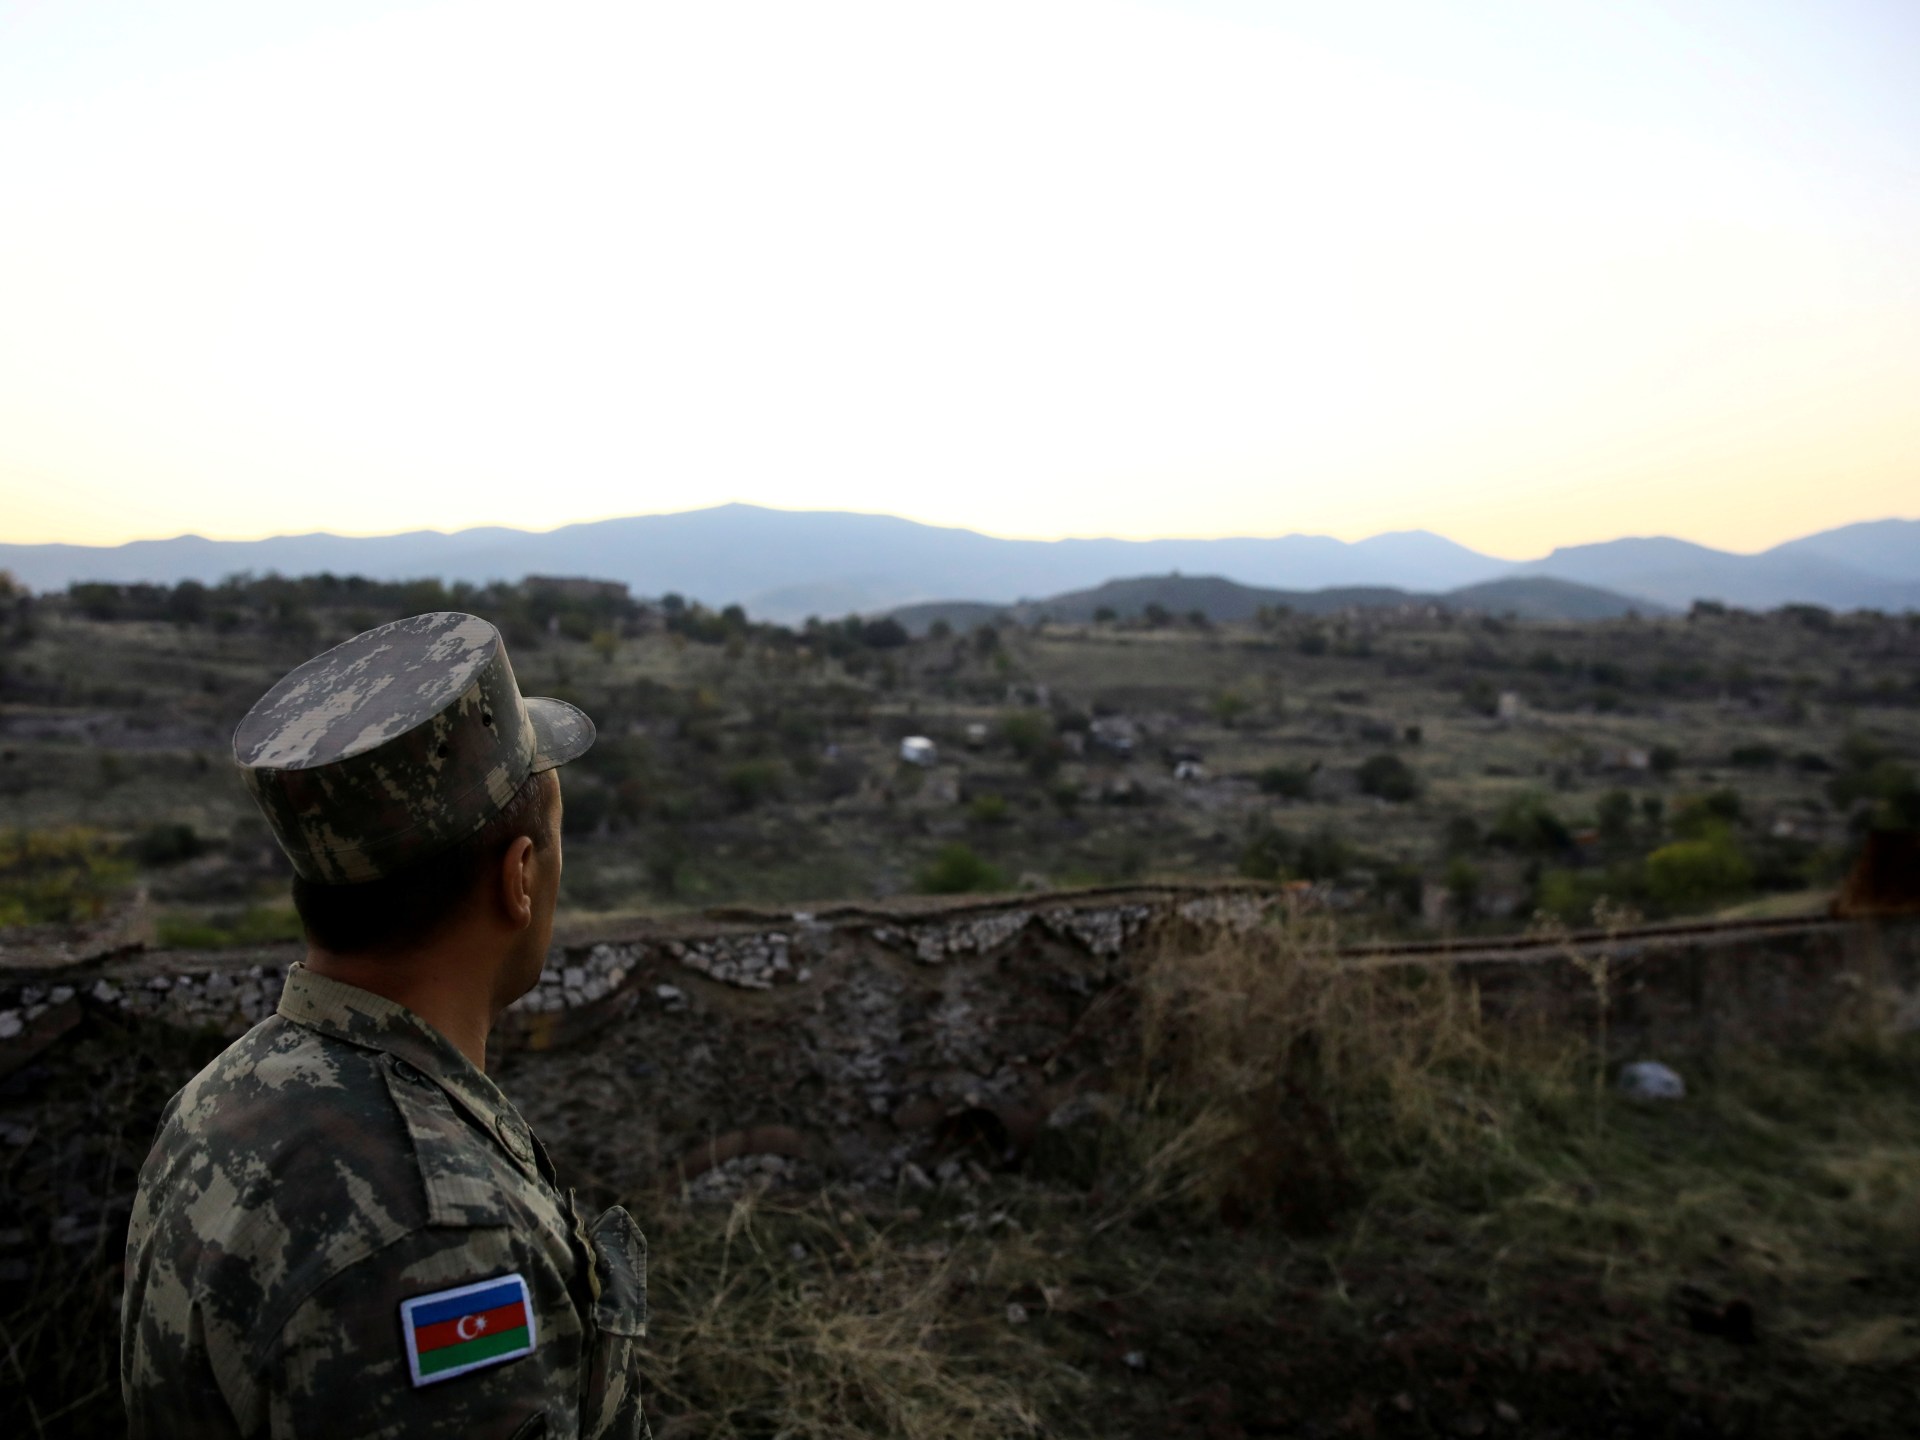 Azerbaijan says 71 soldiers killed in Armenia border clashes | Conflict News